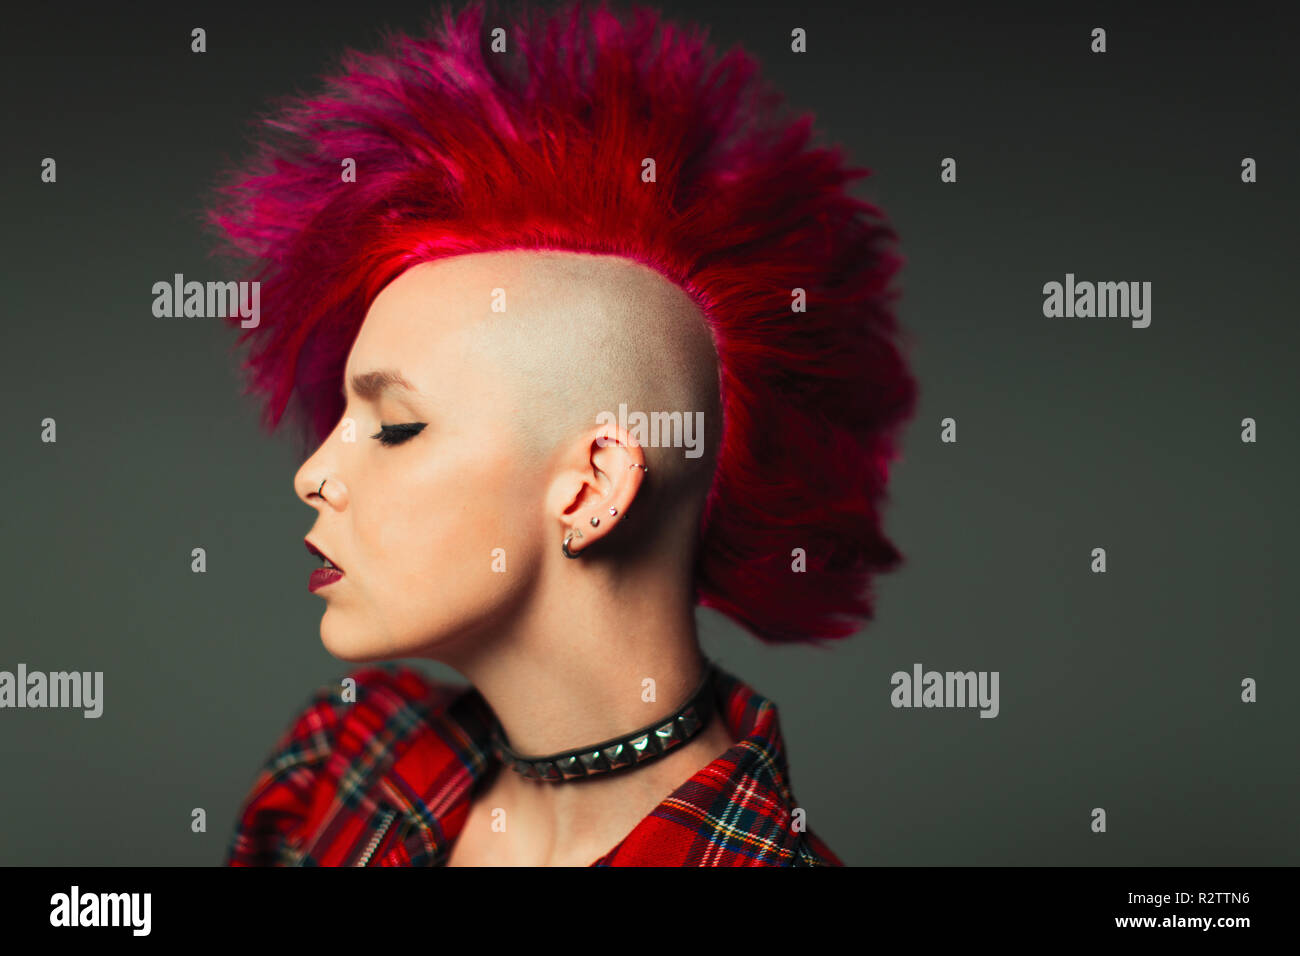 Profile portrait cool young woman with pink mohawk Stock Photo